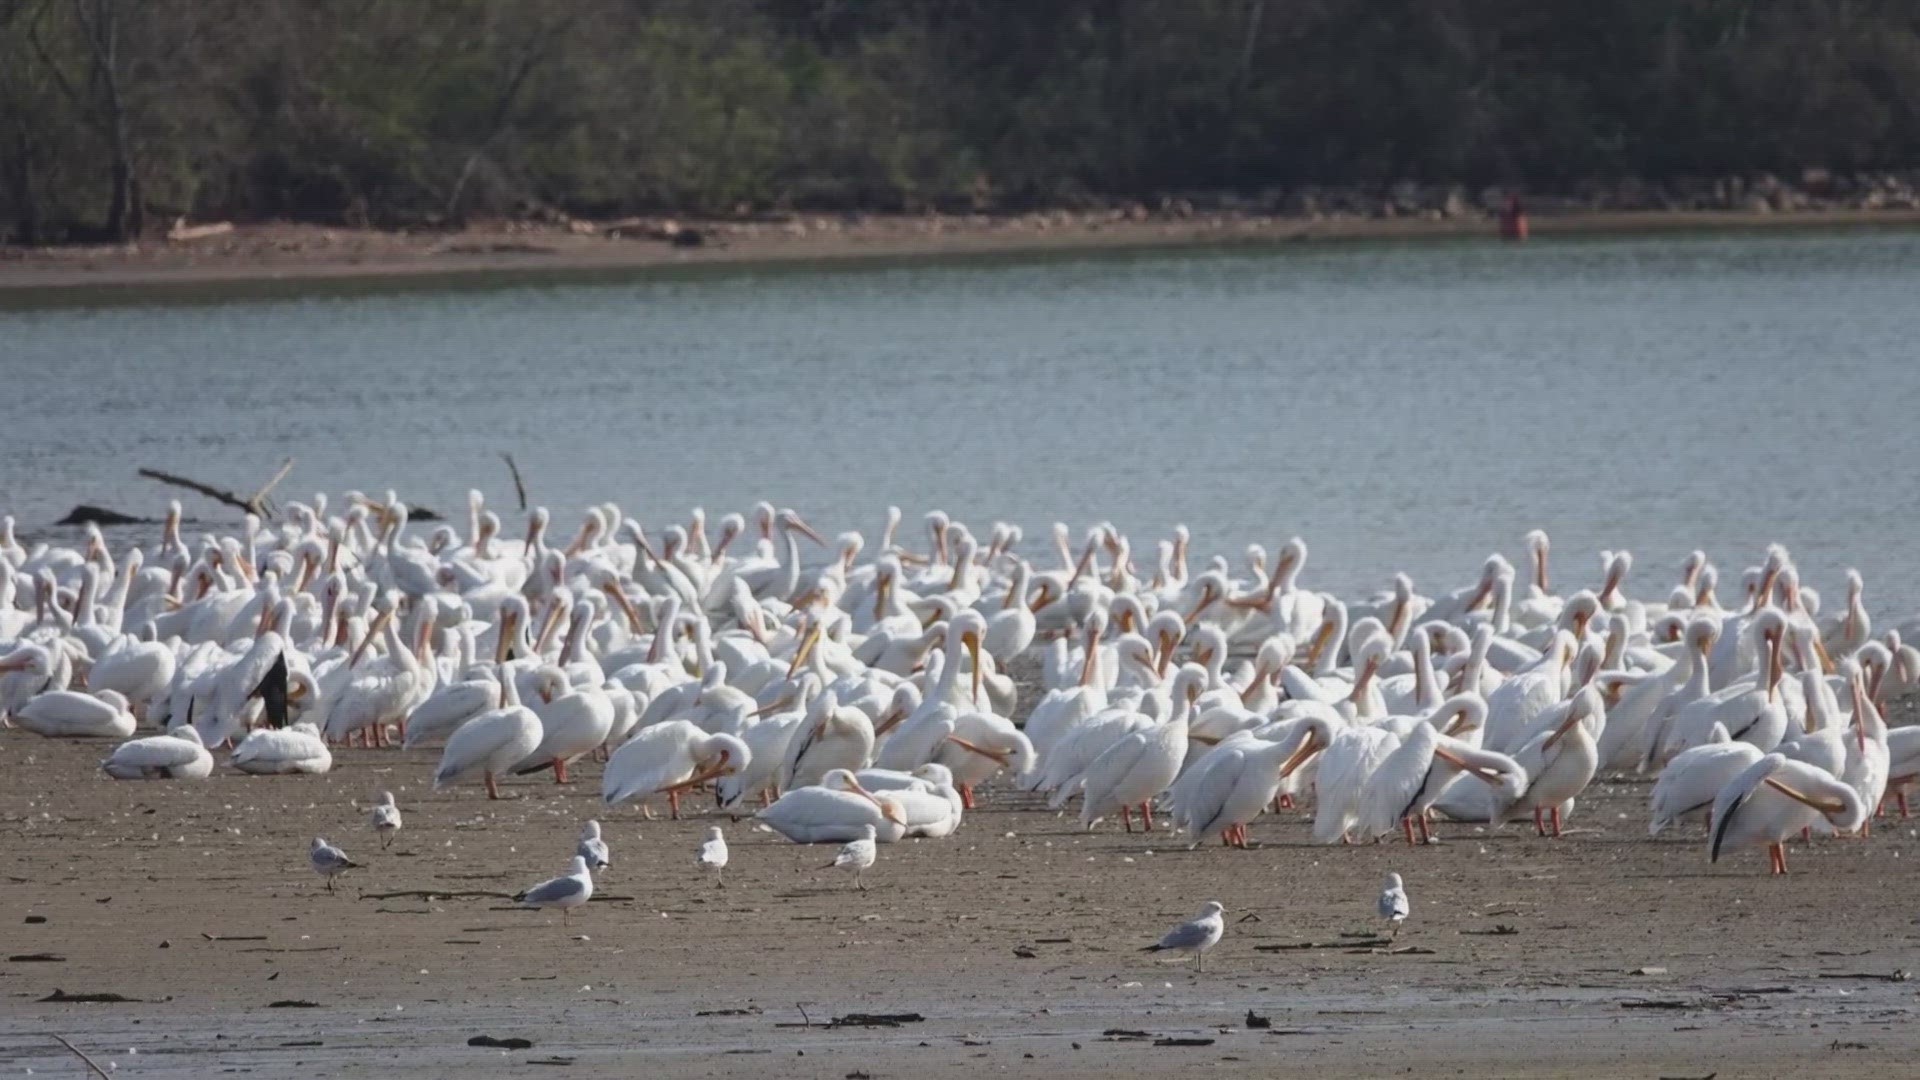 It’s certainly a sight we’re not used to seeing here in East Tennessee… Yes, those are pelicans.